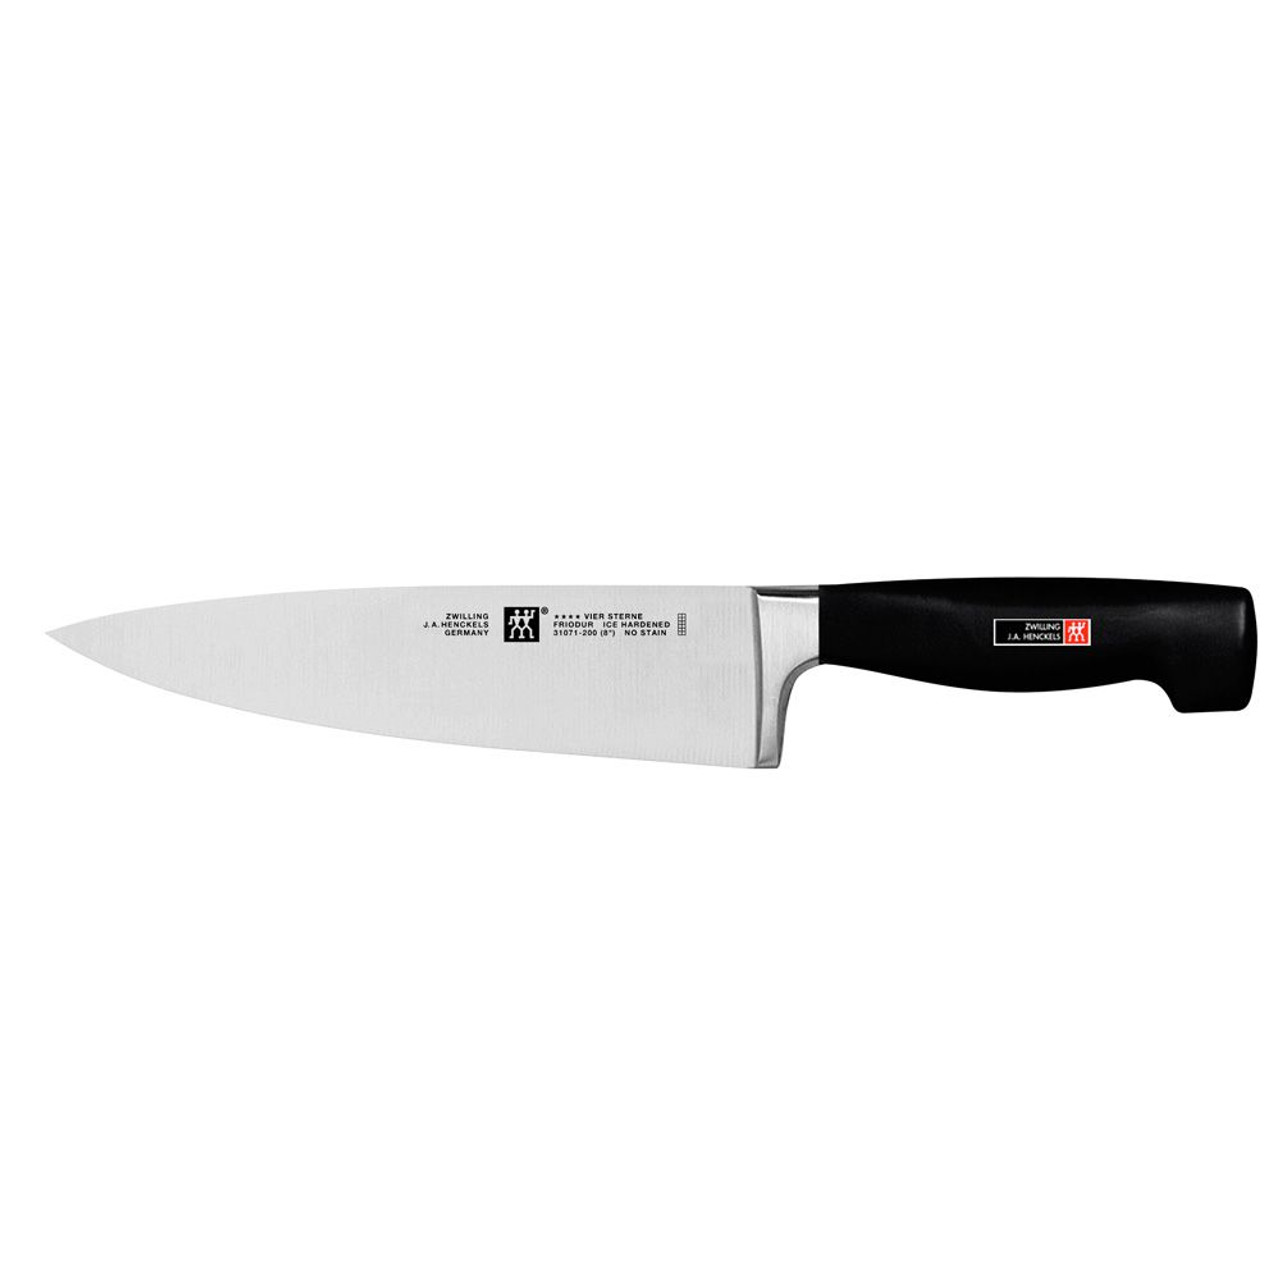 Zwilling J.A. Henckels Four Star Cook's Knife, 8 in. - Fante's Kitchen Shop  - Since 1906